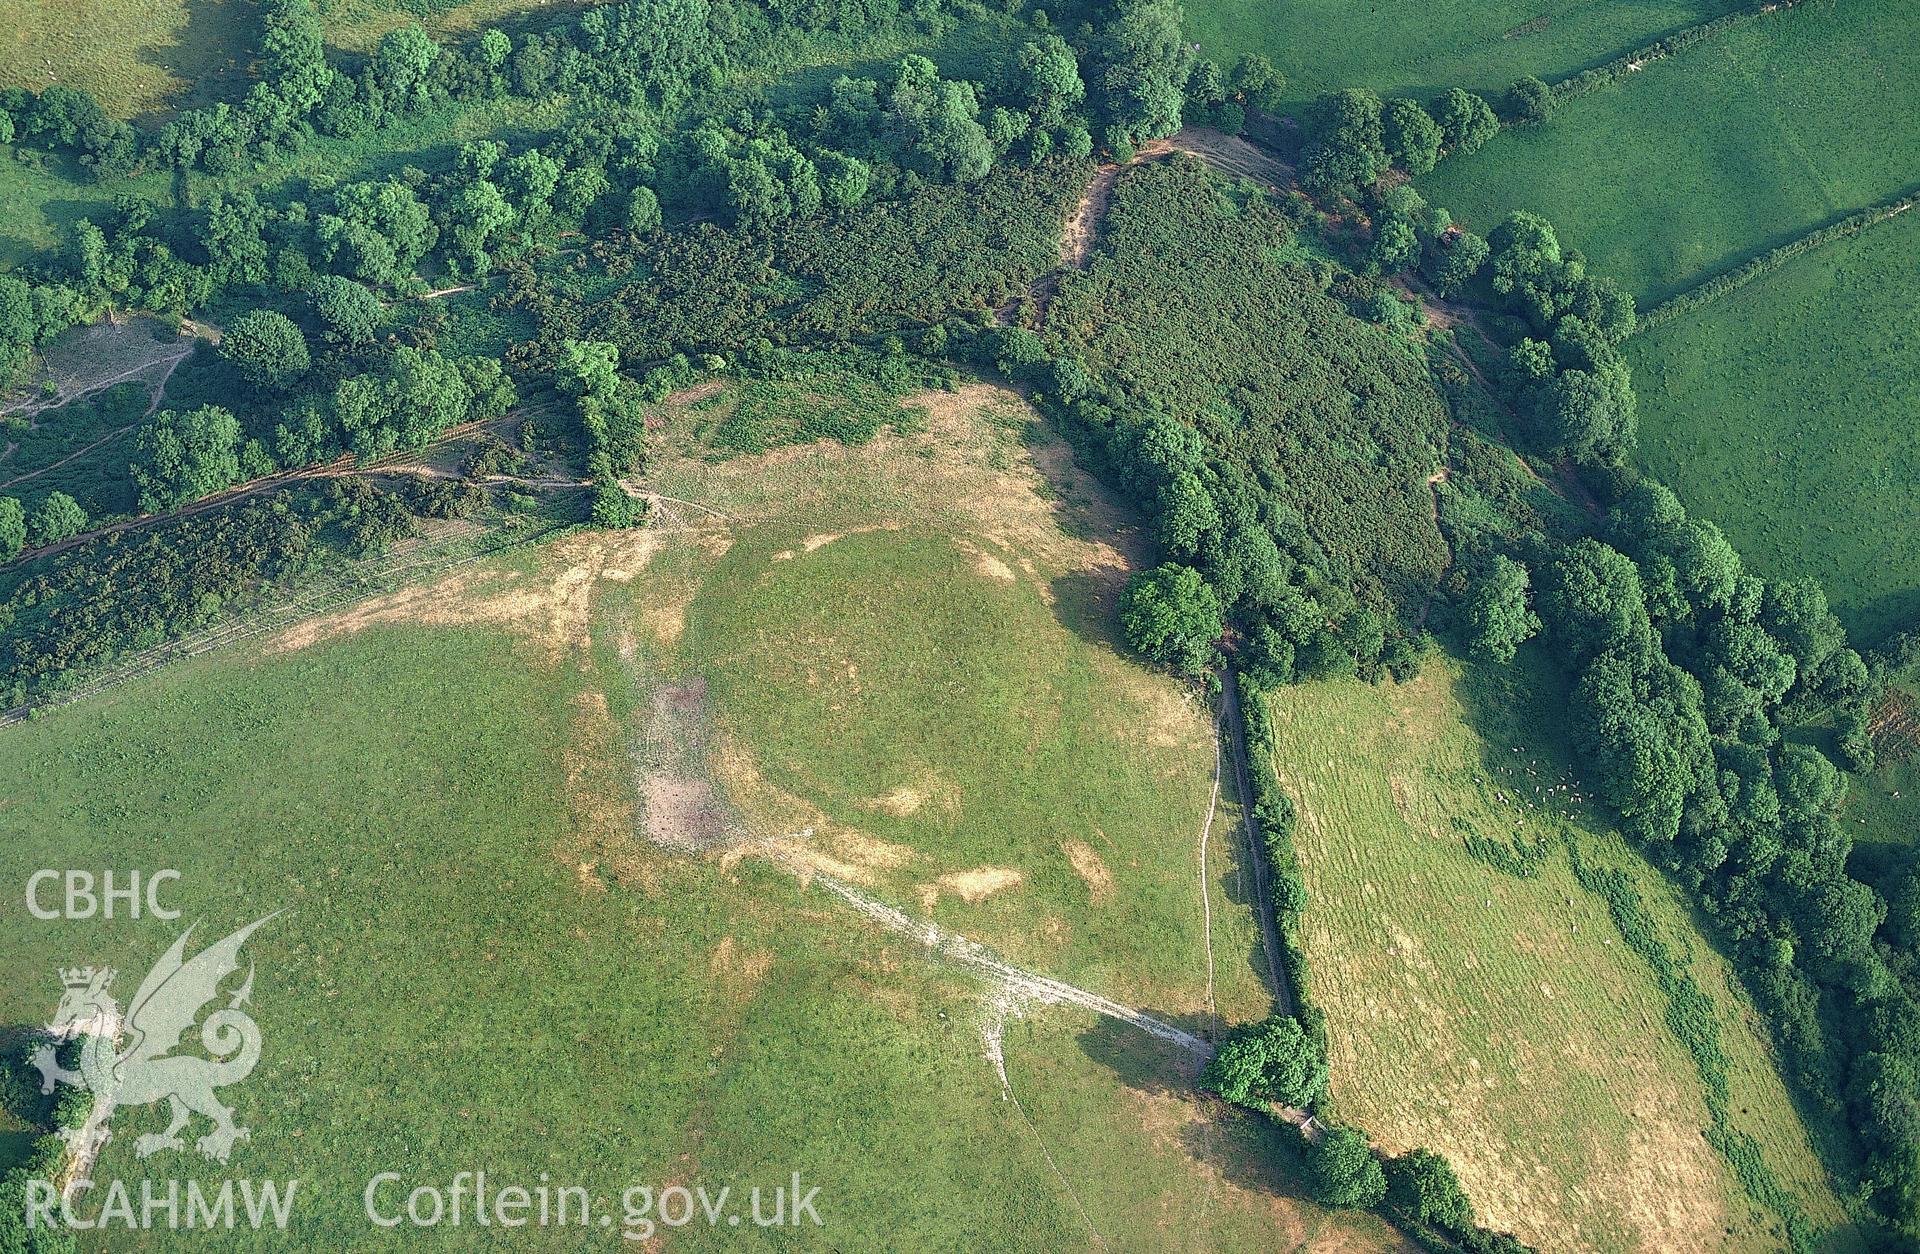 RCAHMW colour oblique aerial photograph of Gaer Parc y Castell. Taken by C R Musson on 08/07/1995